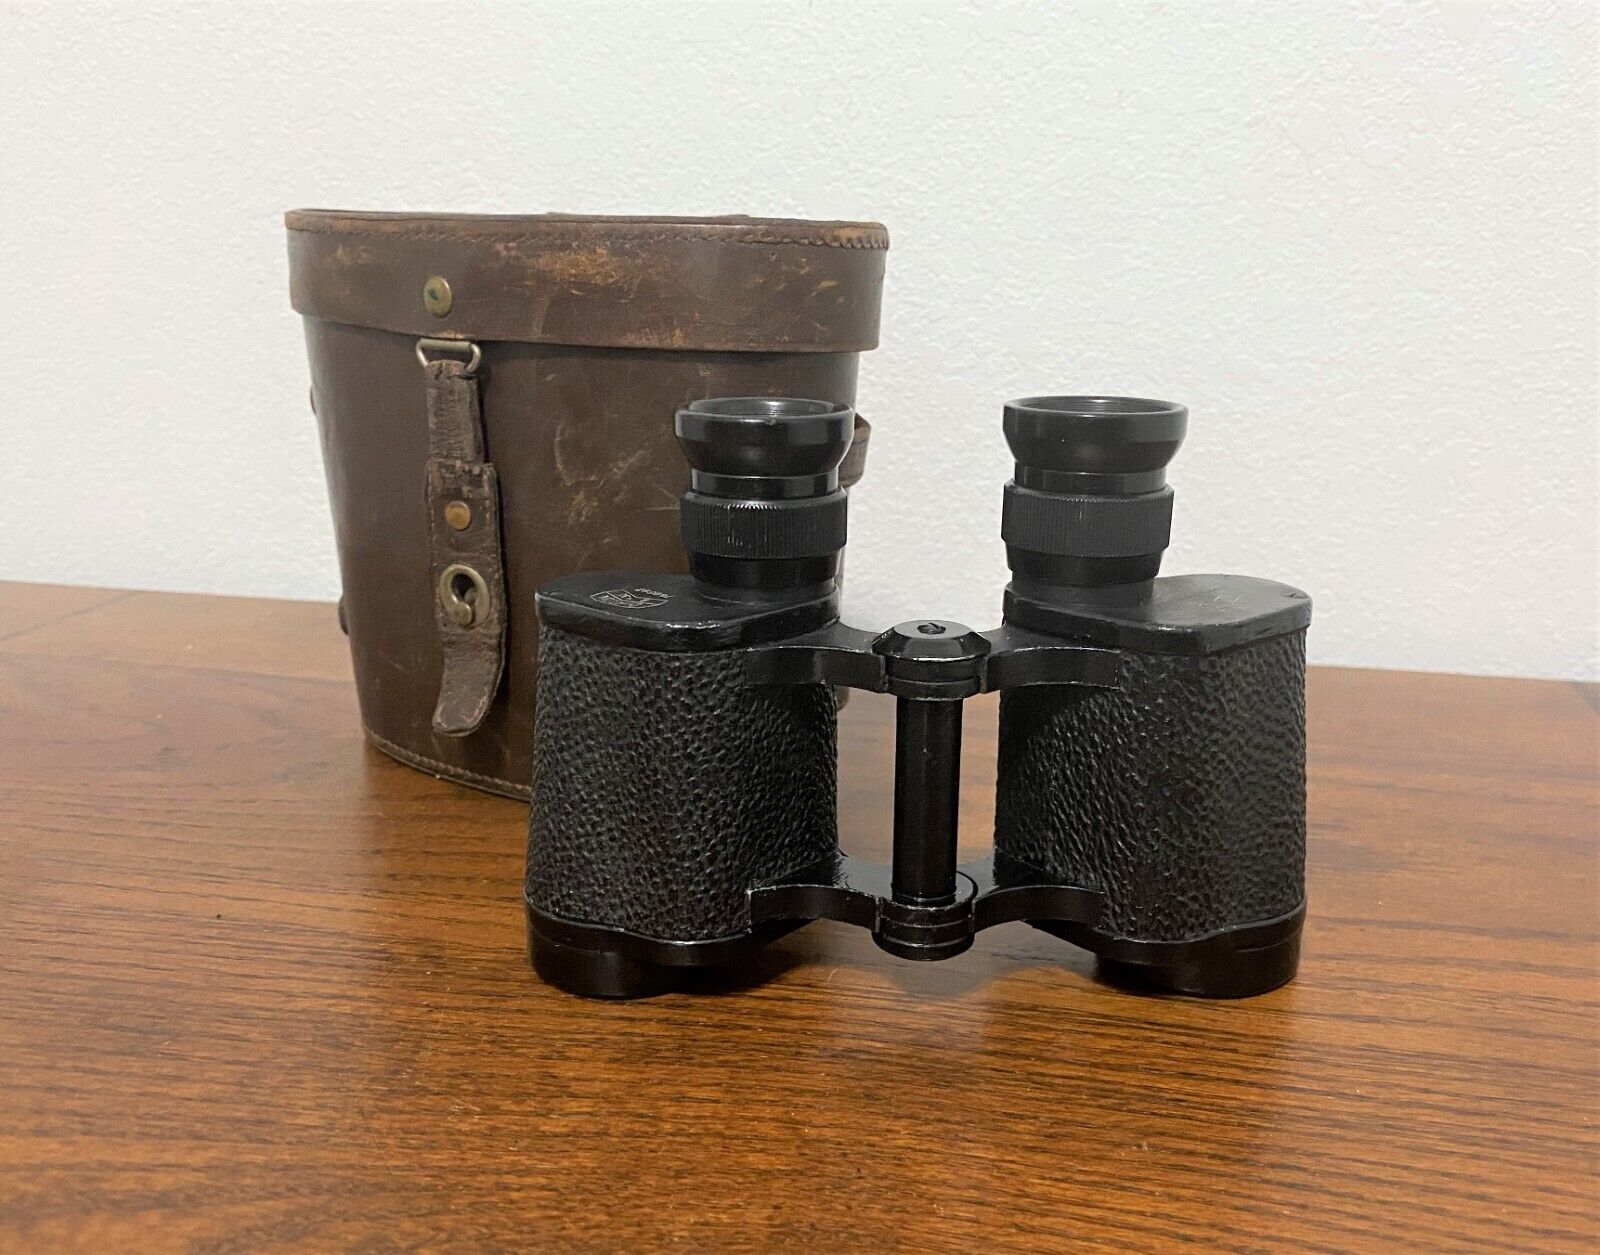 Hensoldt Wetzlar Diagon 8x30 Binoculars with Leather Case - Military - Germany